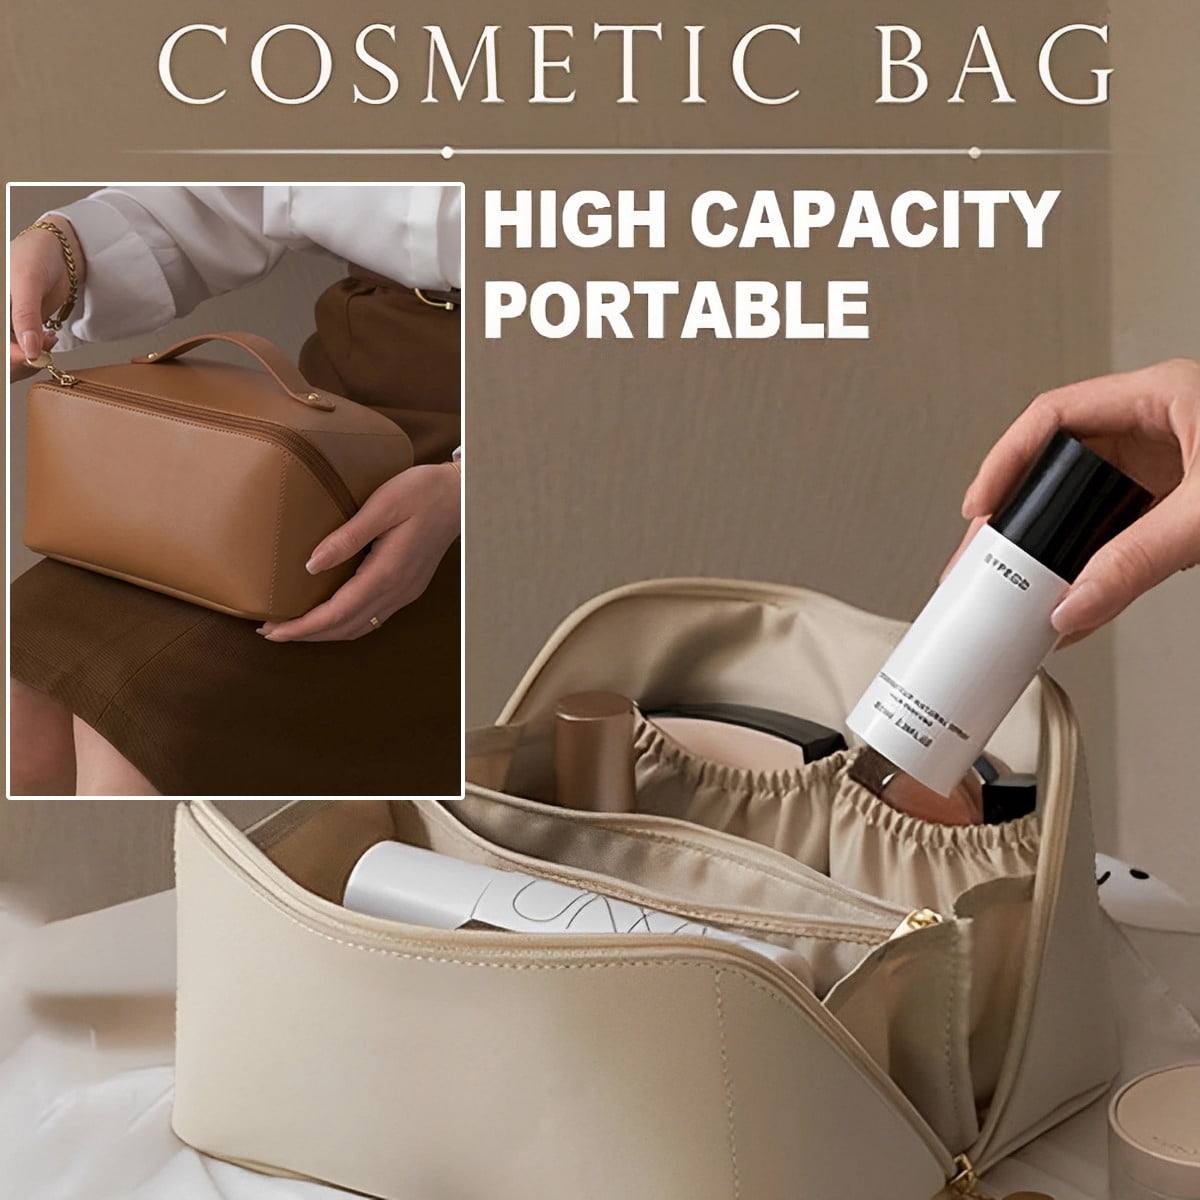 6065 Portable Makeup Bag widely used by women's for storing their makeup  equipment's and all while